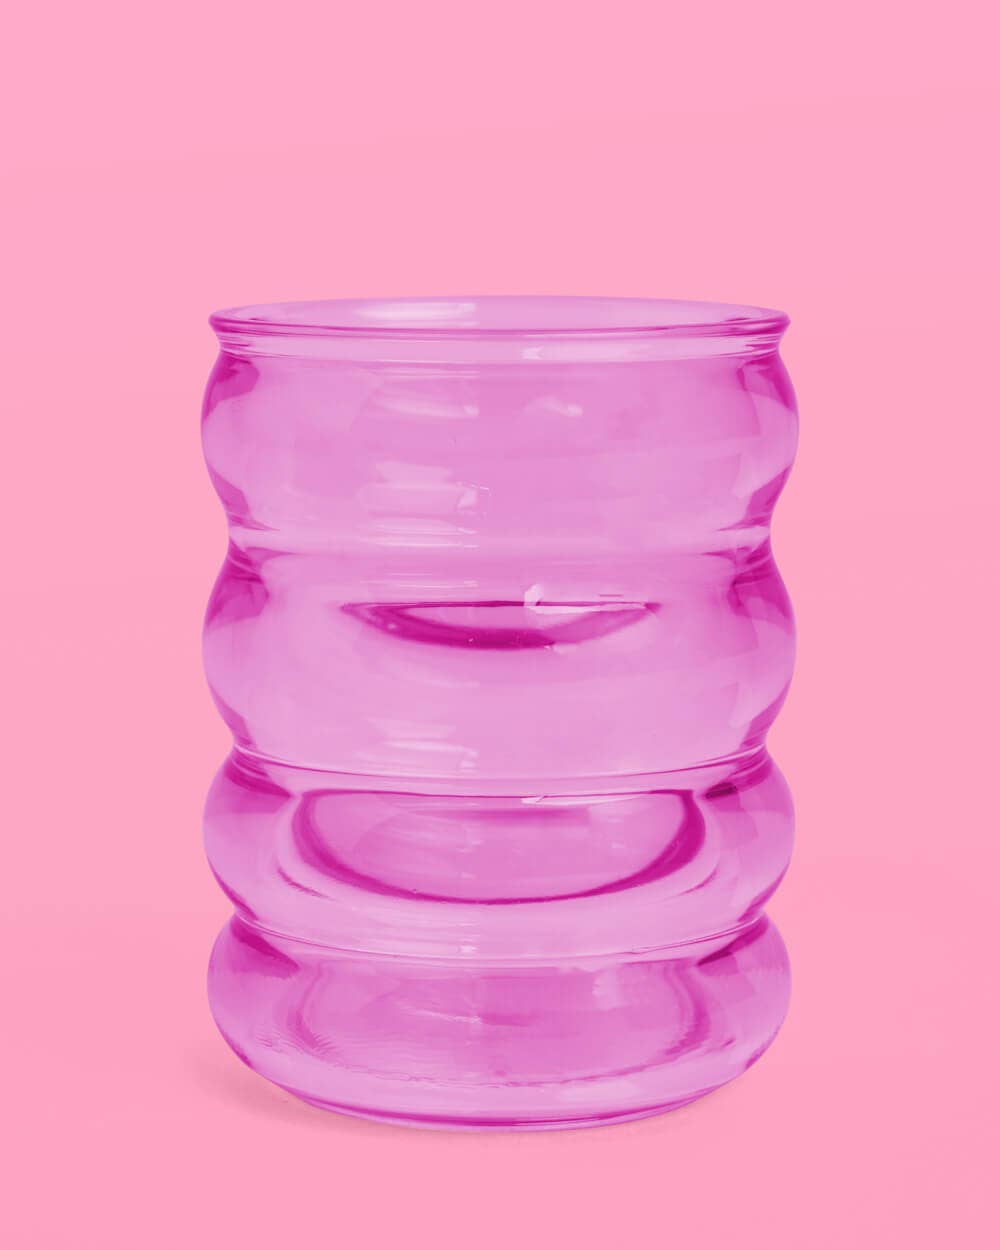 Wavy Reusable Acrylic Party Decorations Cups